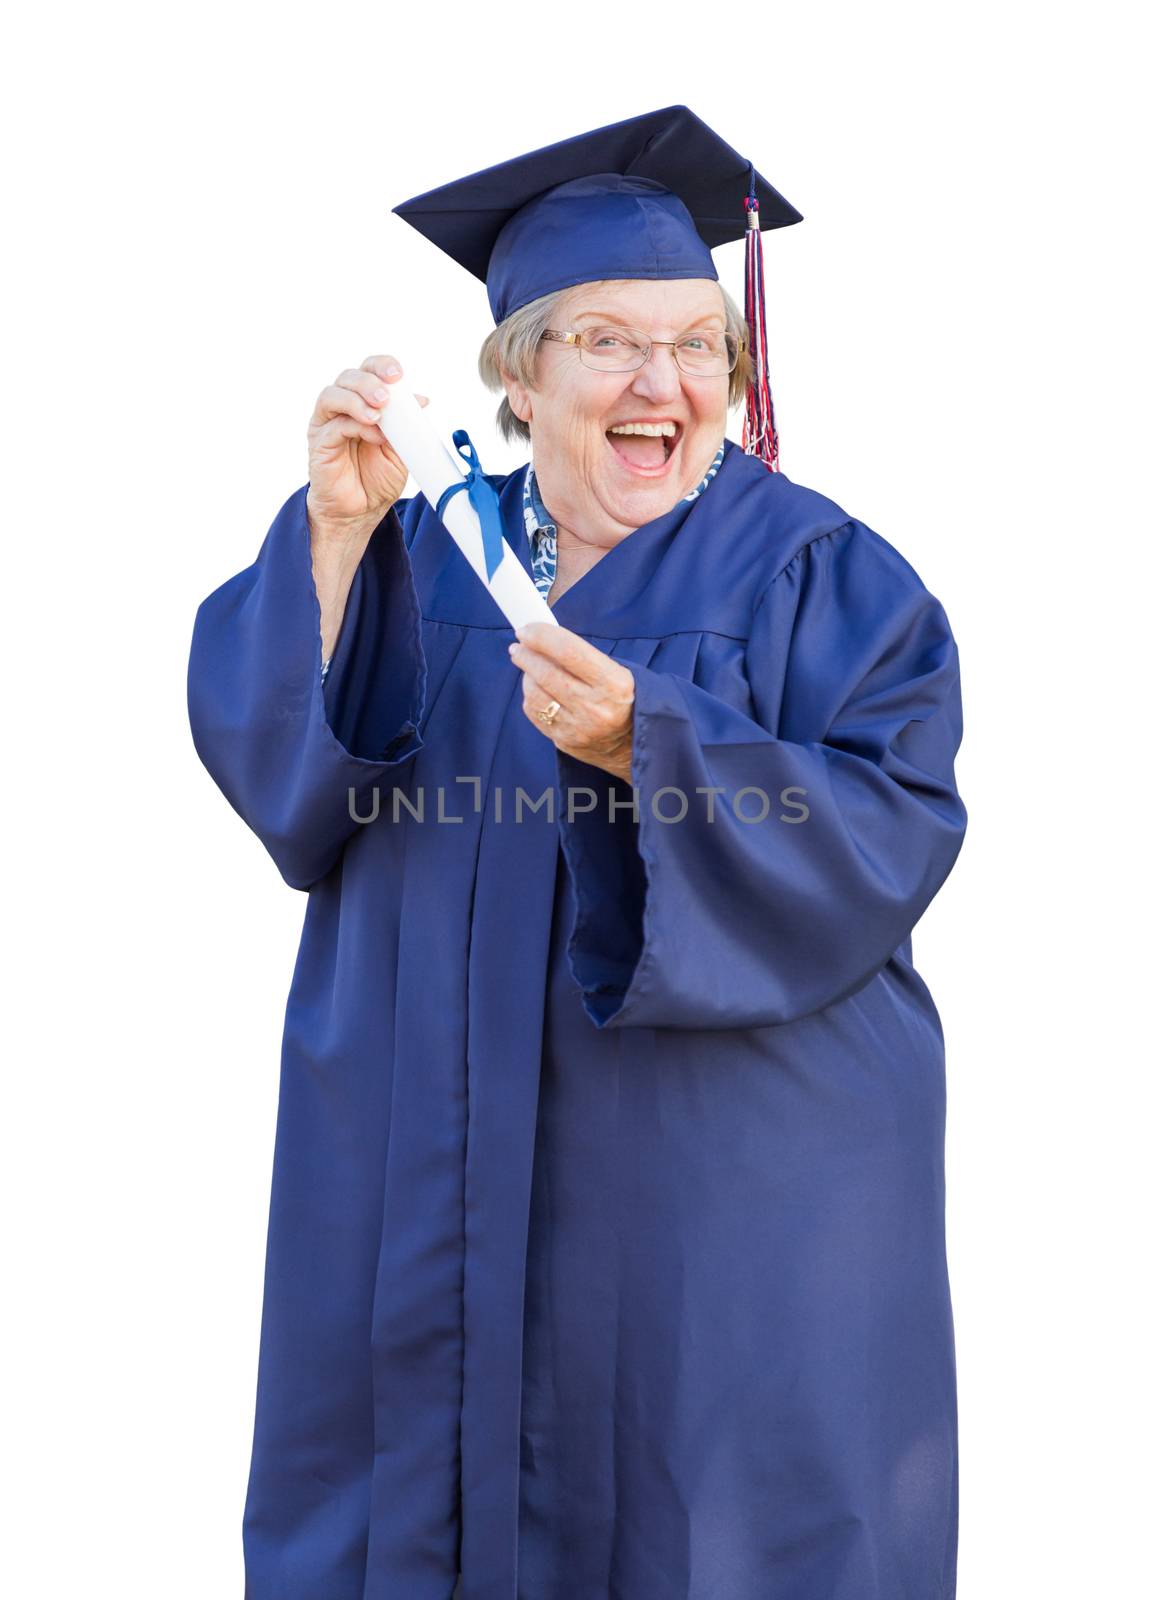 Happy Senior Adult Woman Graduate In Cap and Gown Holding Diploma Isolated on a White Background.